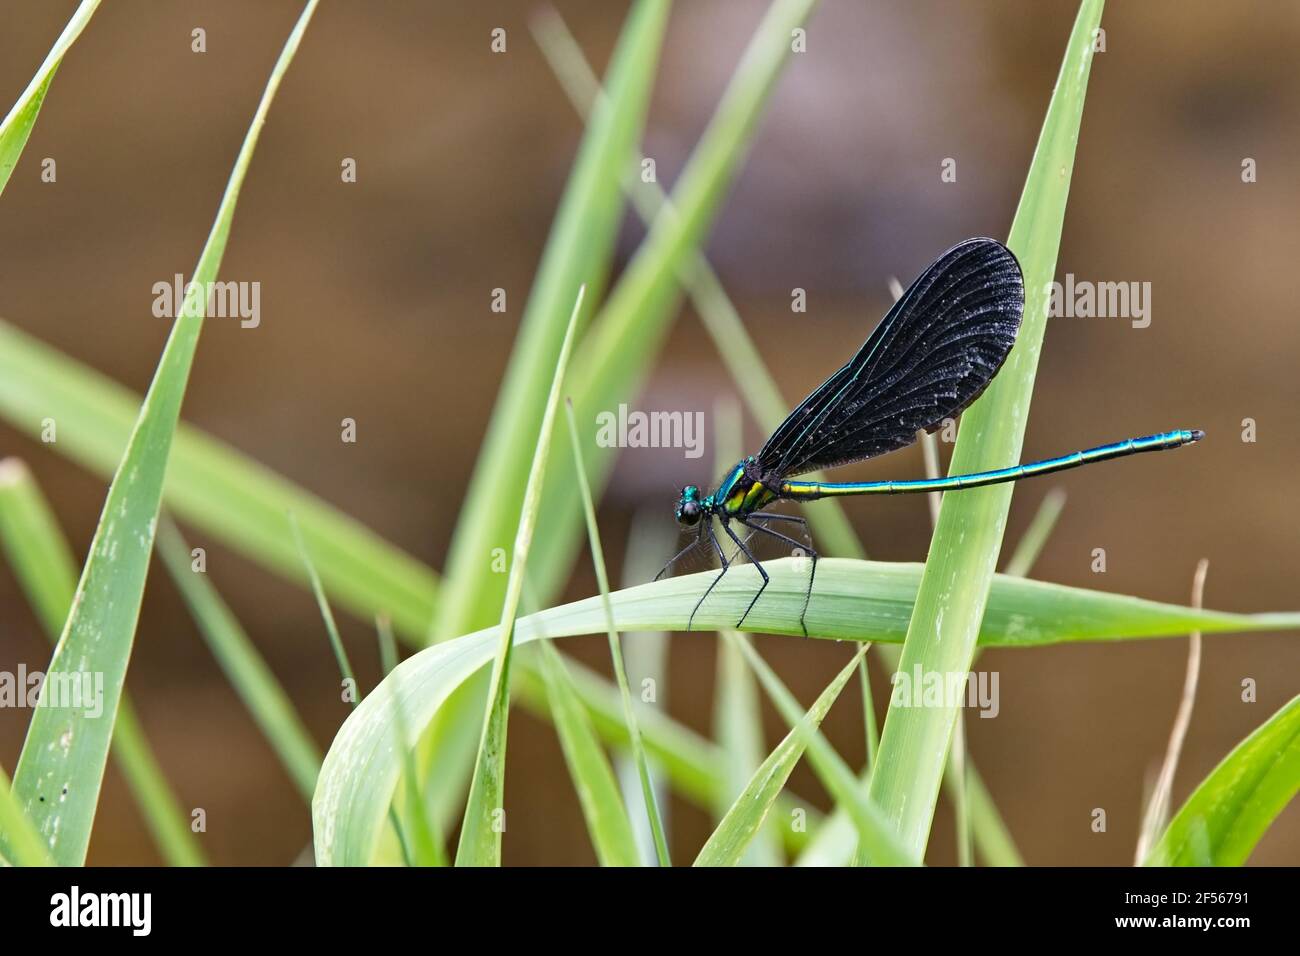 Horizontal close-up side view of an Ebony Jewelwing damselfly perched on a blade of grass alert and ready. Stock Photo